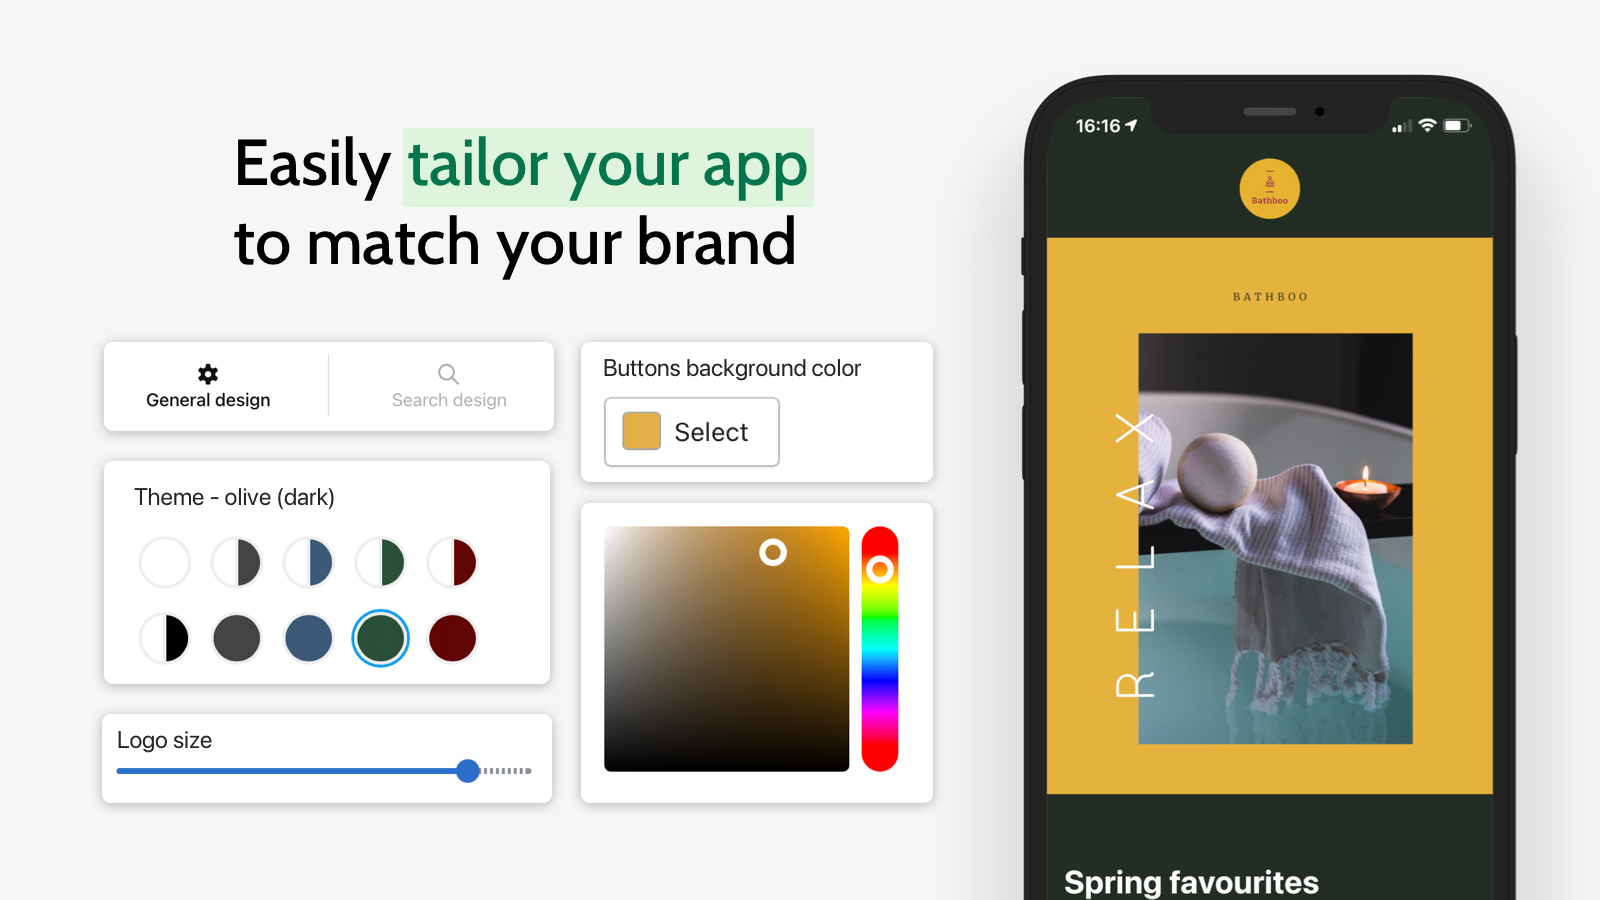 Easily tailor your app to match your brand